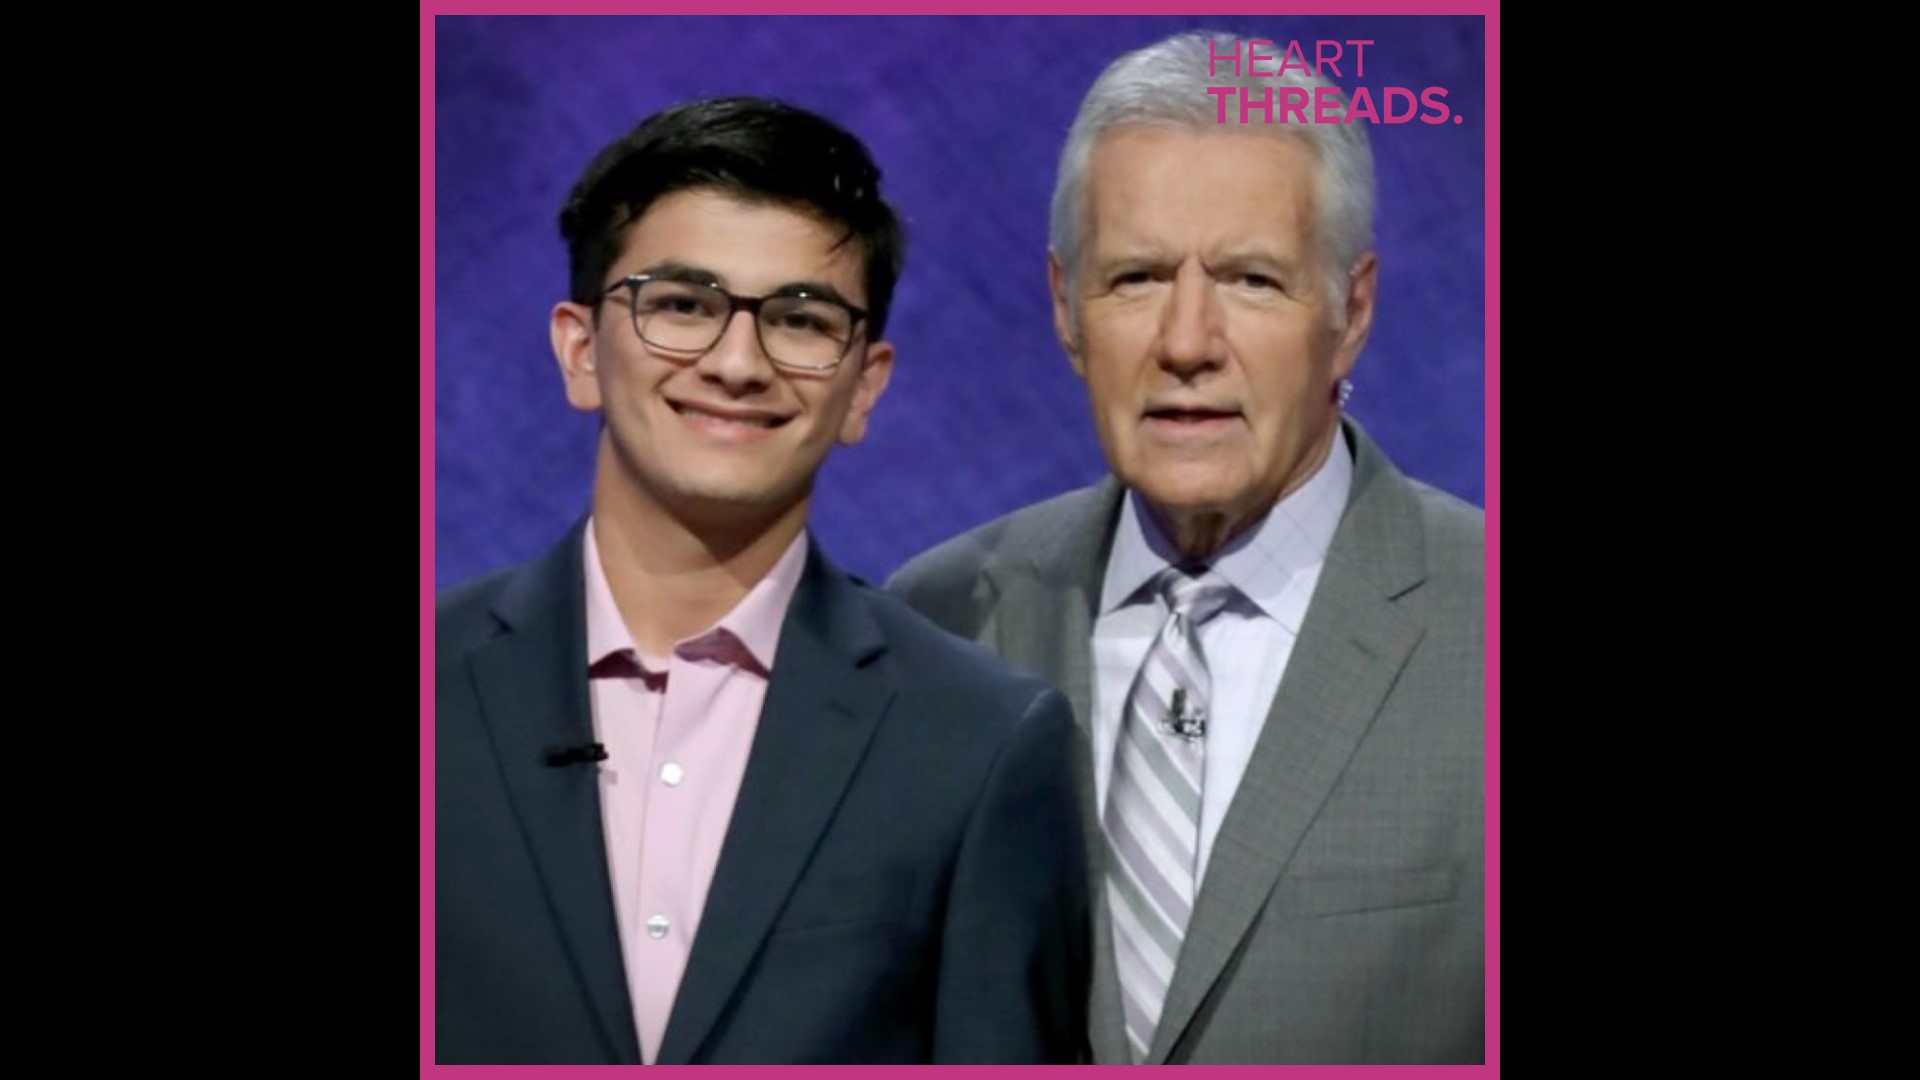 18-year-old Avi Gupta won $100,000 in the Jeopardy Teen Tournament. Then he donated $10,000 to cancer research in honor of Alex Trebek.